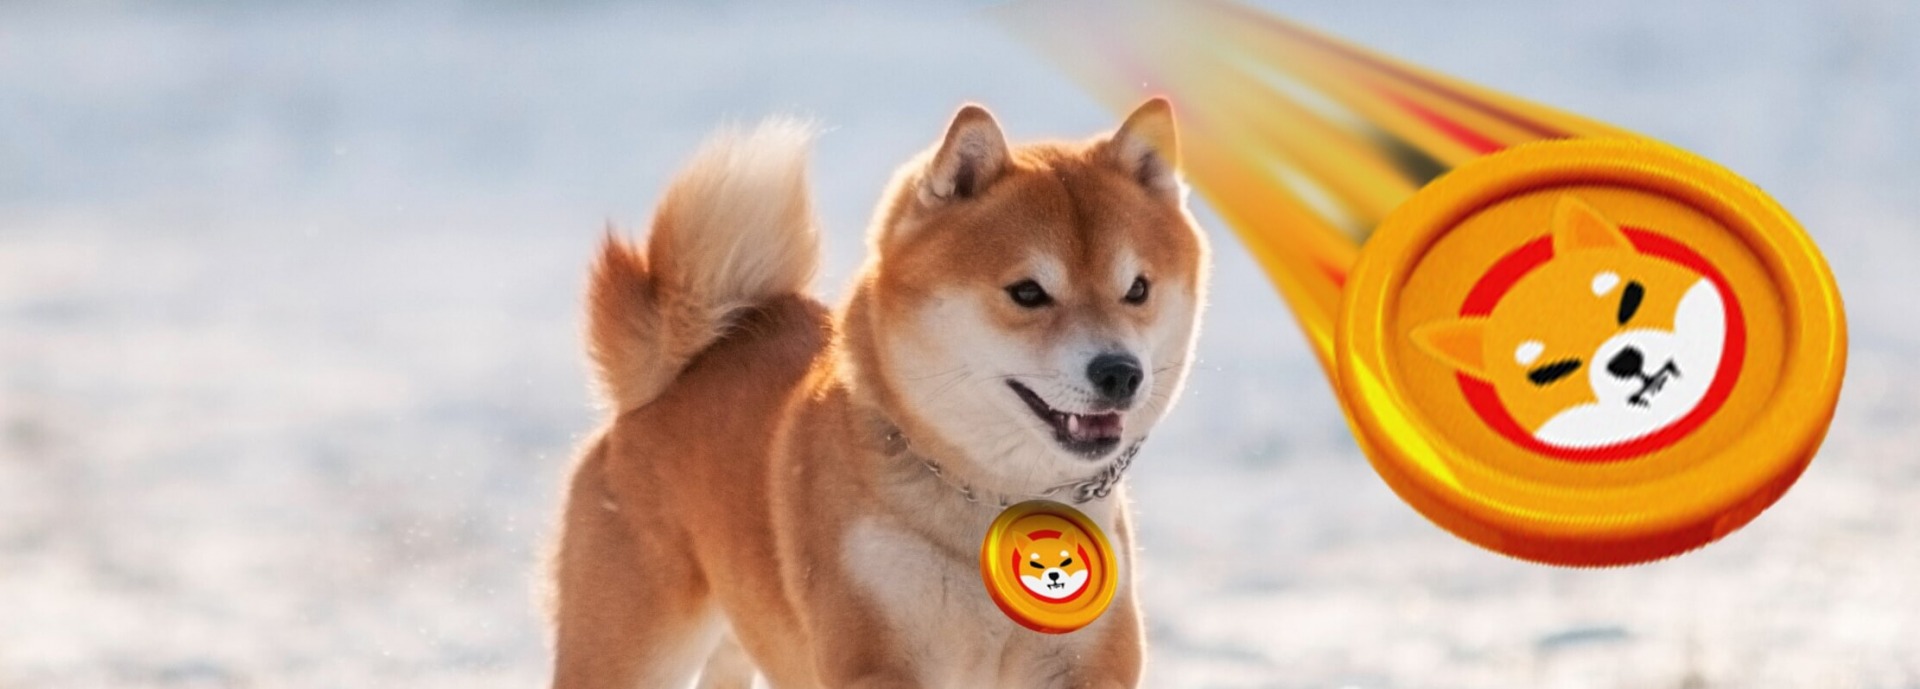 Shiba Inu Coin Hits a Record High and Becomes The 11th Largest Cryptocurrency